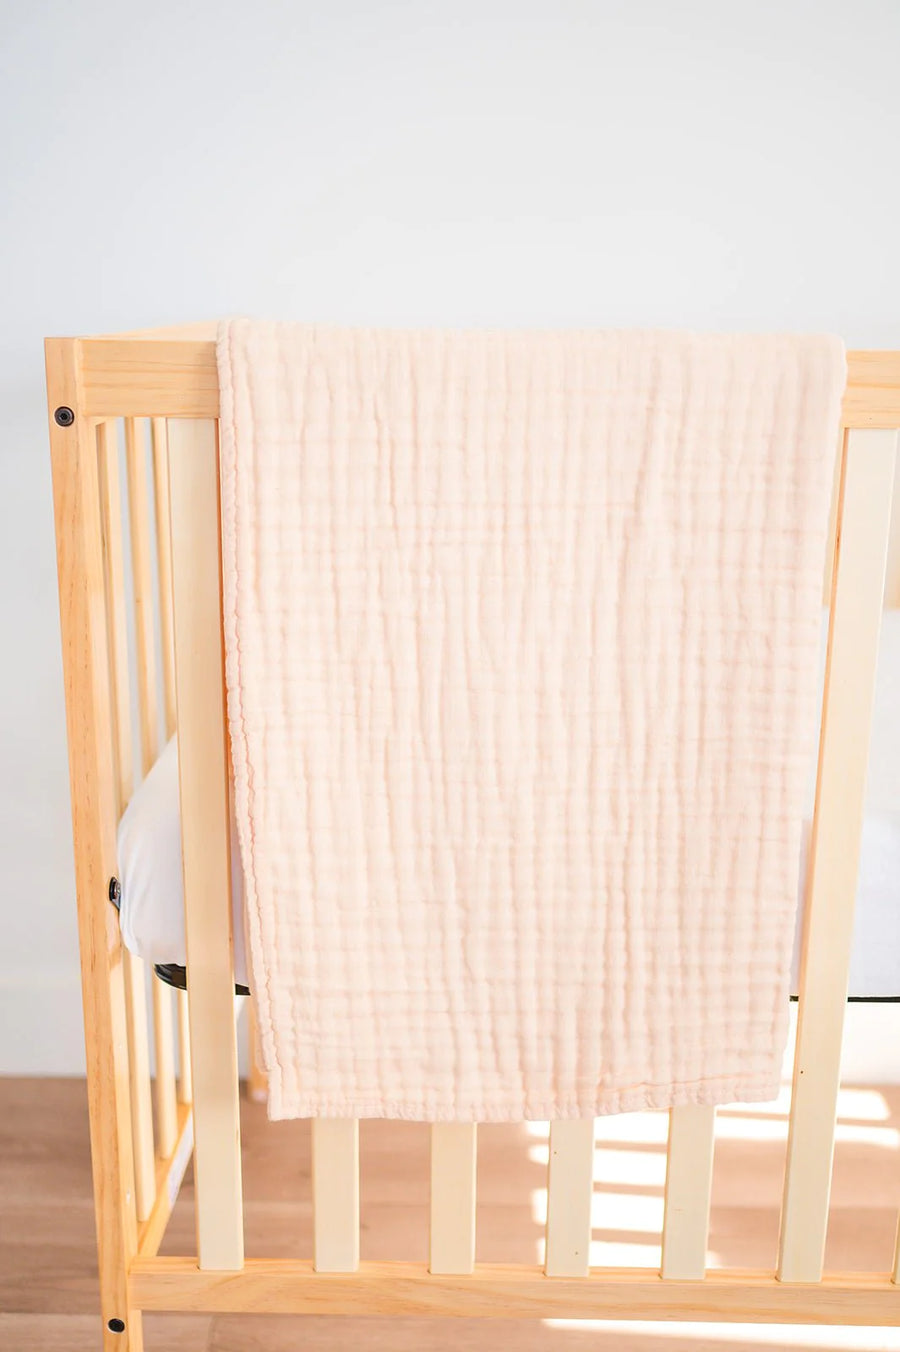 Muslin 6-Layer Blanket - Apricot